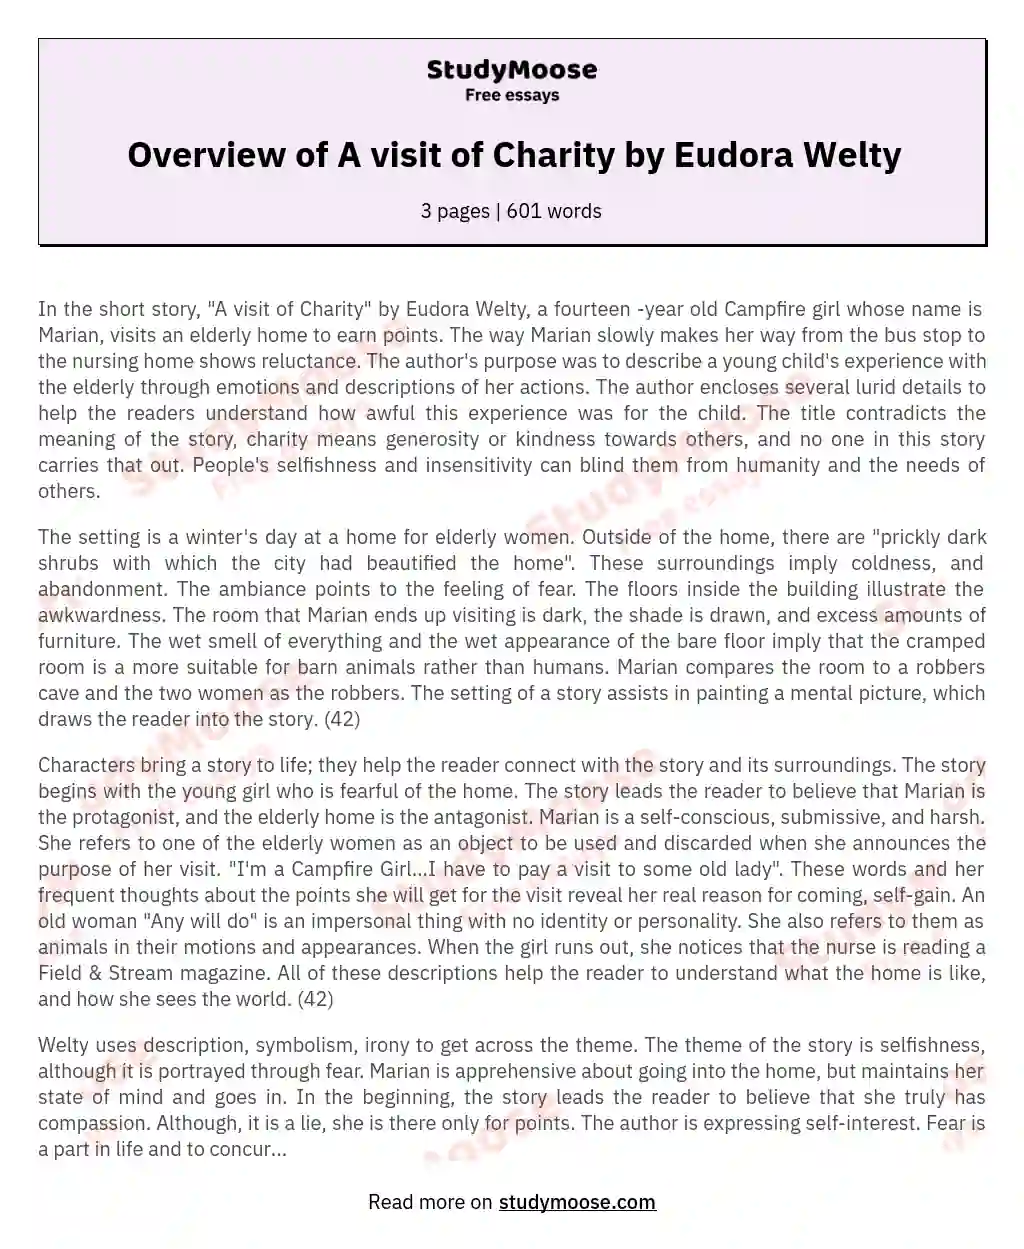 Overview of A visit of Charity by Eudora Welty